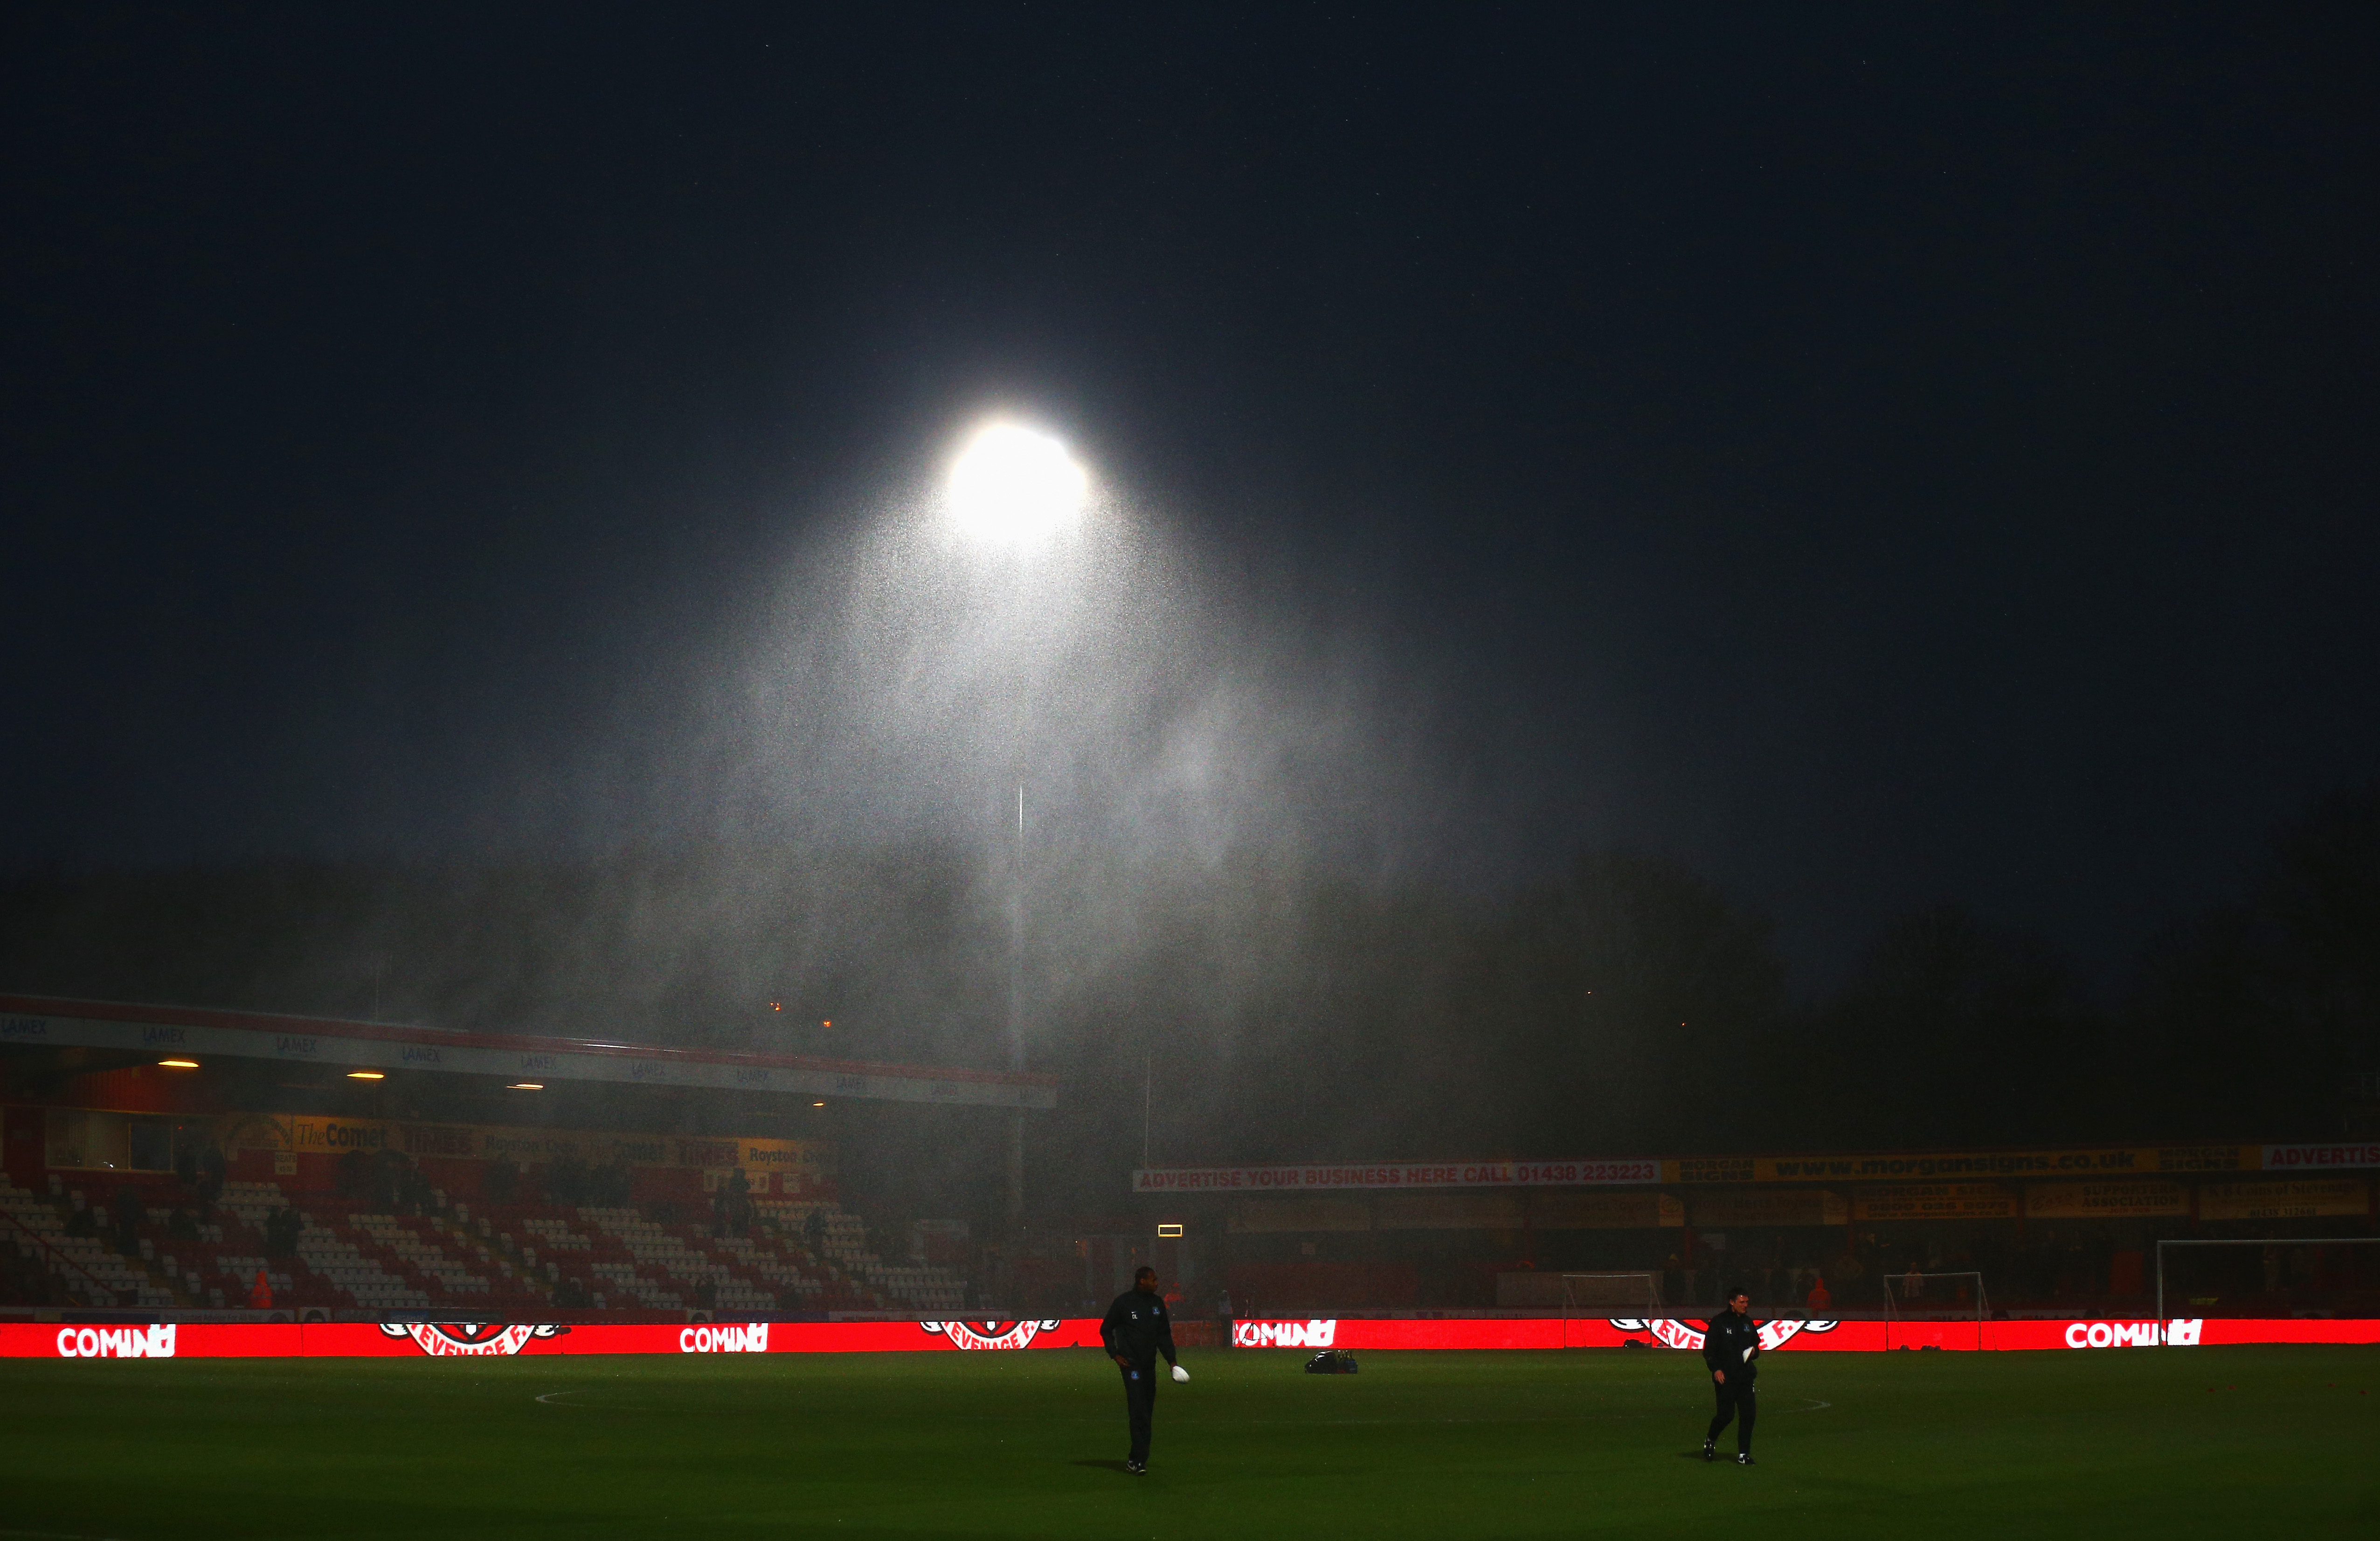 STEVENAGE, ENGLAND - JANUARY 25: Rain and hail falls prior to the Budweiser FA Cup fourth round match between Stevenage and Everton at the Lamex Stadium on January 25, 2014 in Stevenage, England.  (Photo by Paul Gilham/Getty Images)